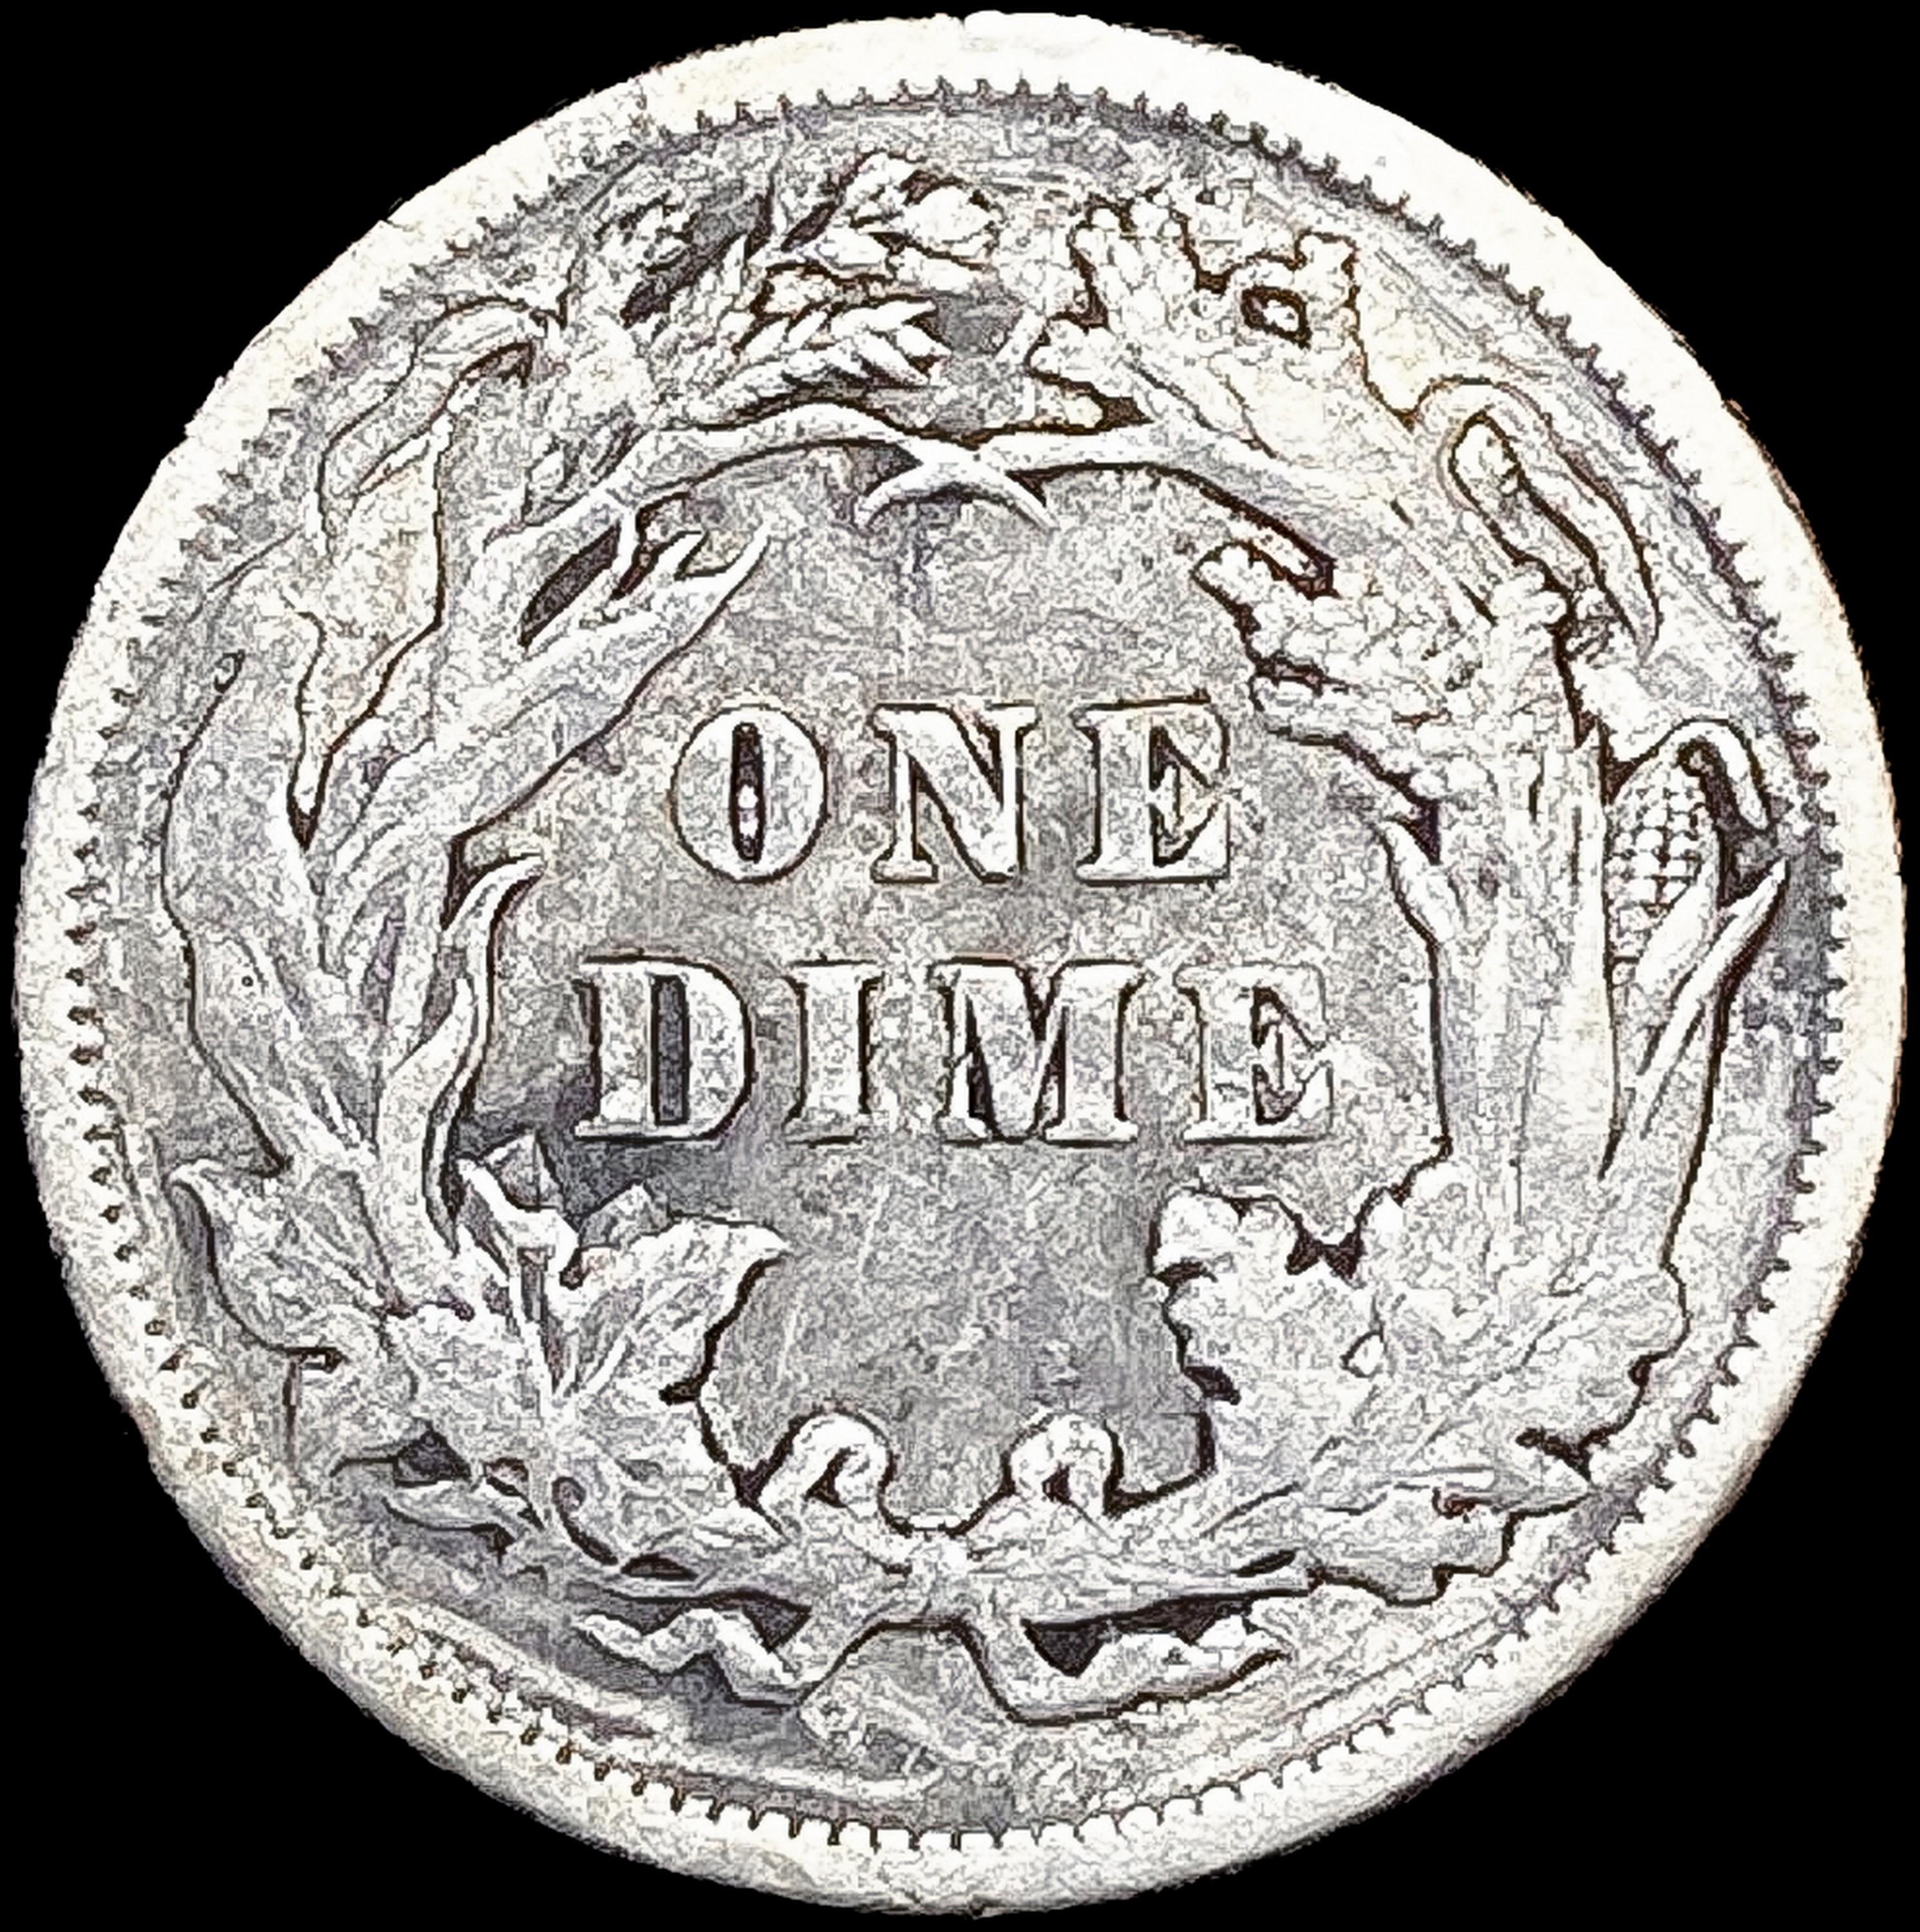 1891 Seated Liberty Dime LIGHTLY CIRCULATED